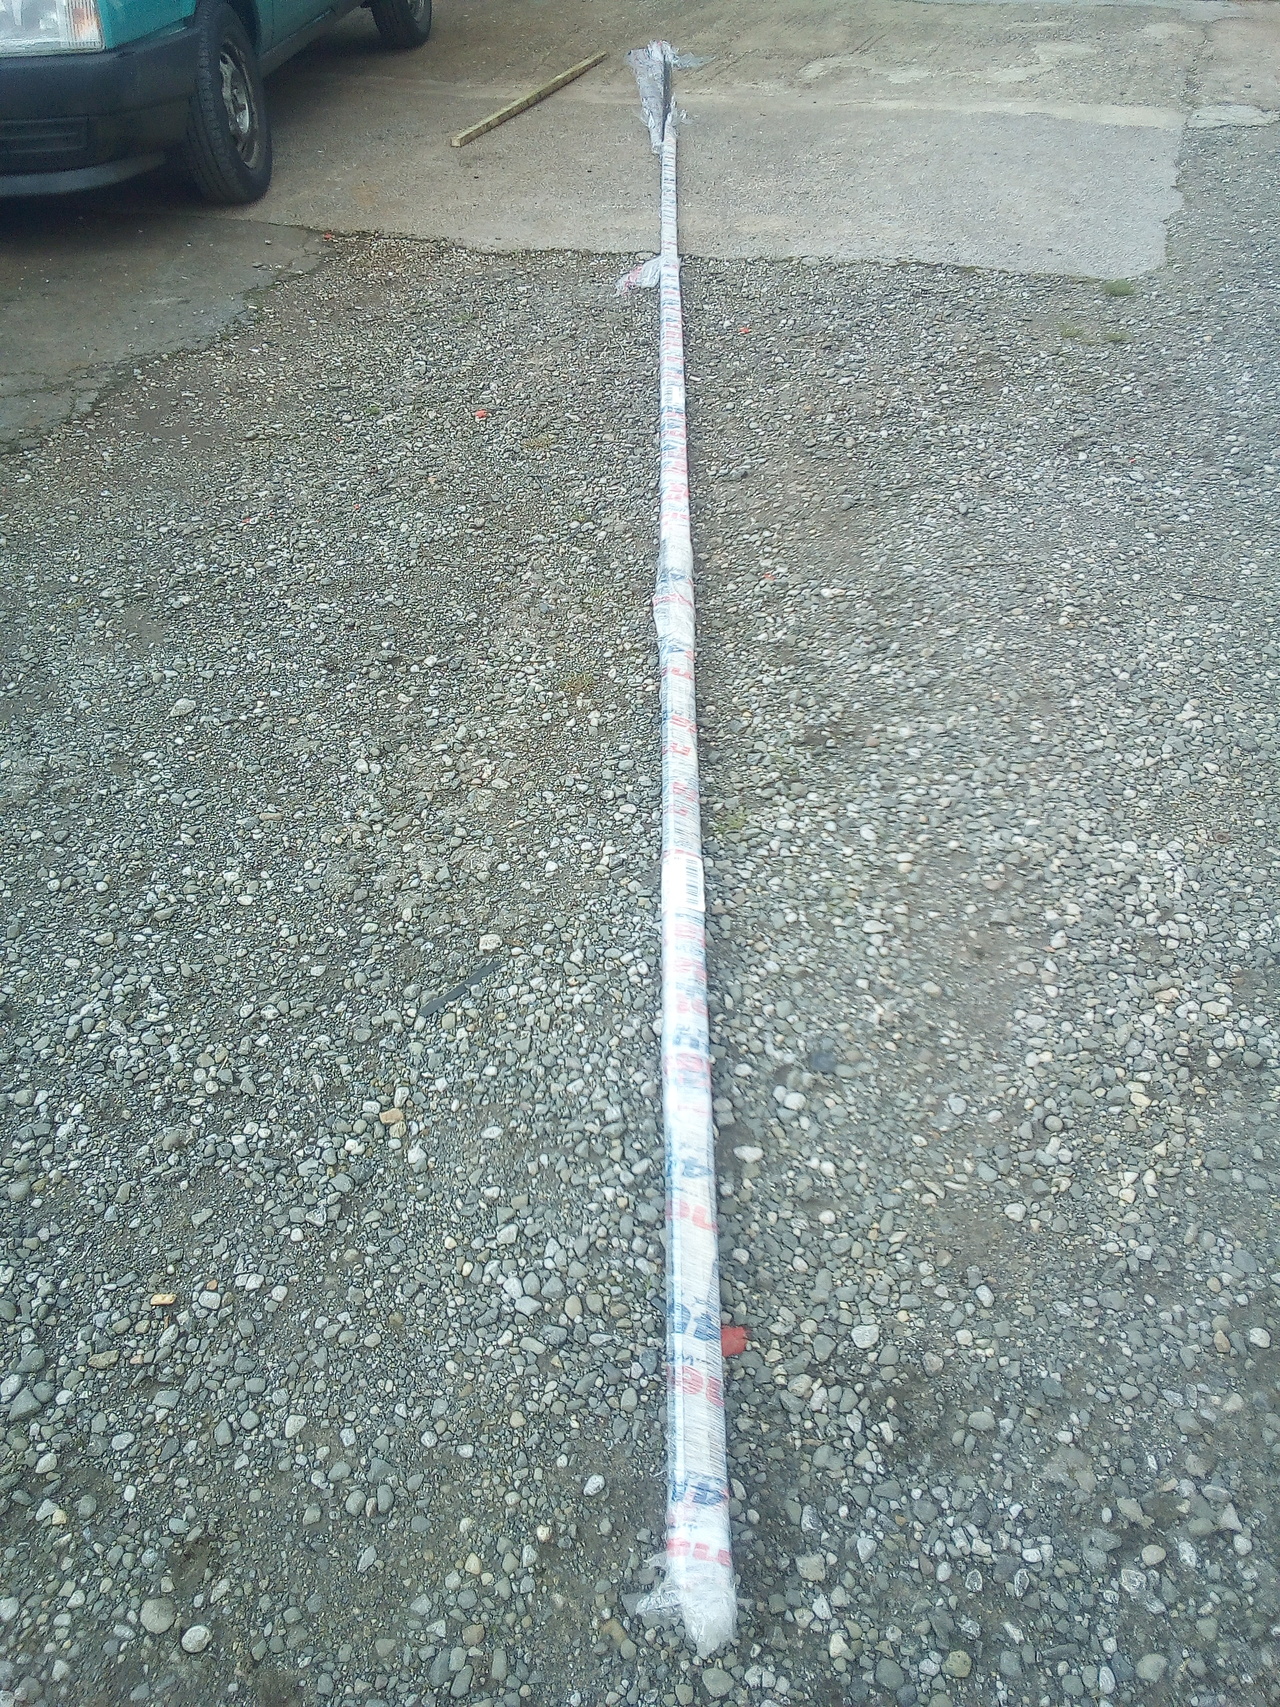 A 3 meter long length of steel, wrapped up in plastic for
shipping